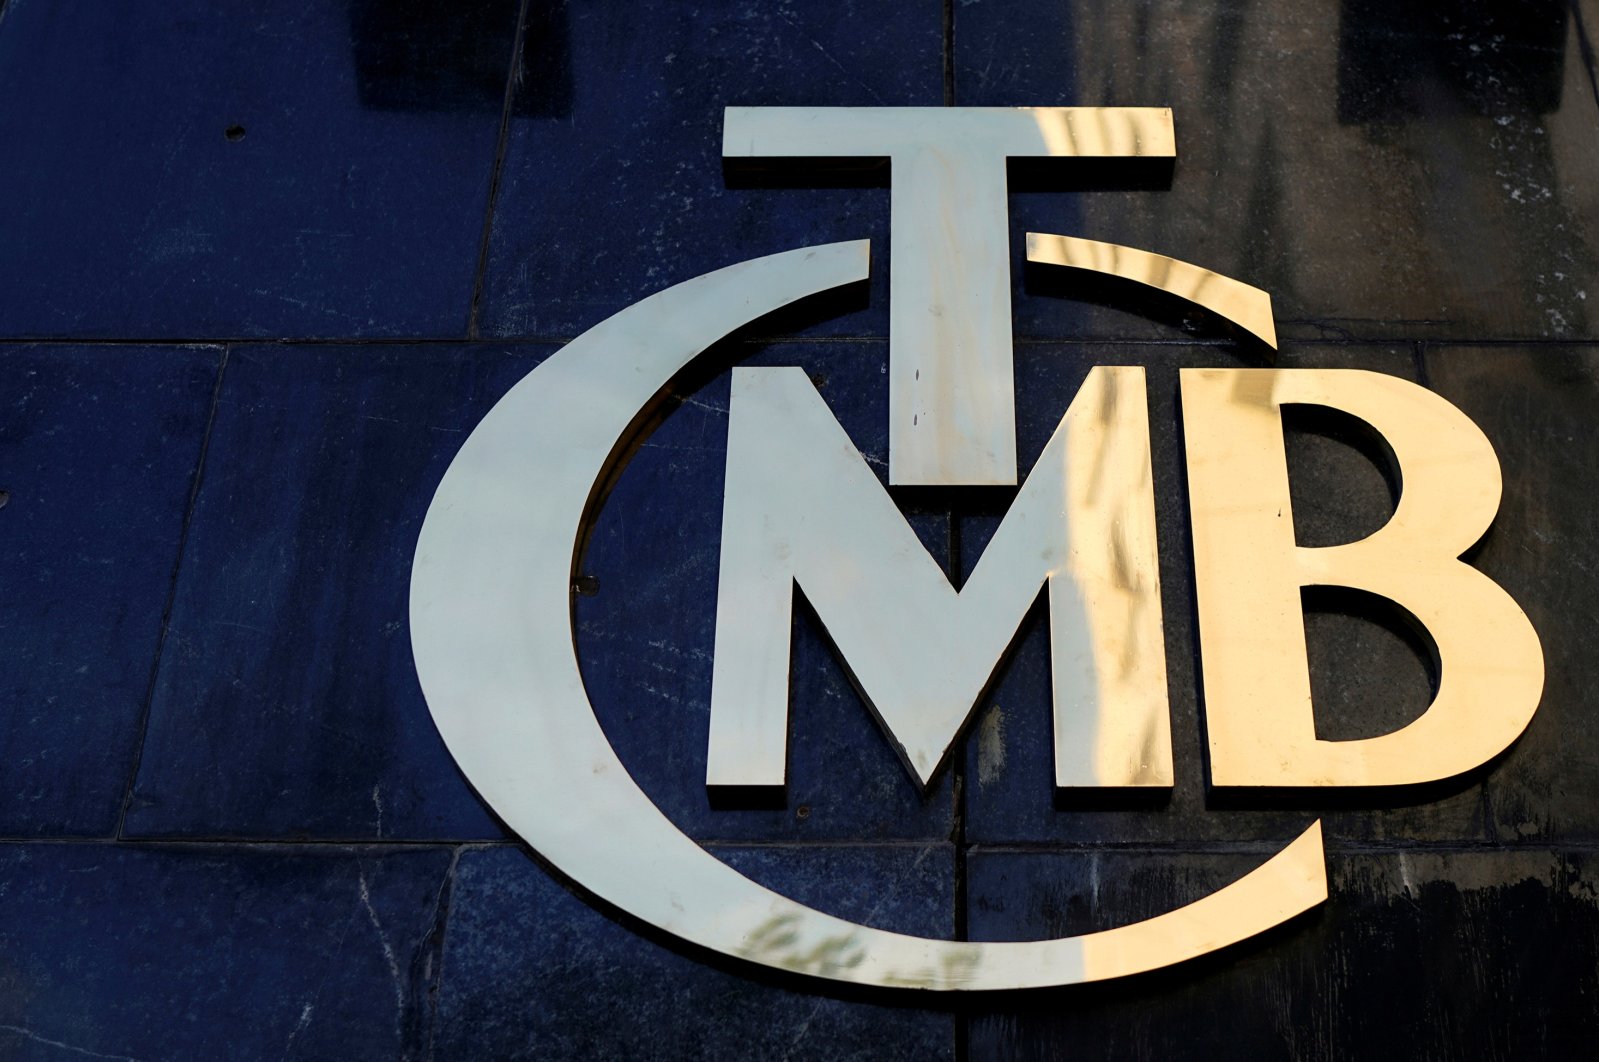 A logo of Turkey's Central Bank (TCMB) is pictured at the entrance of the bank's headquarters in Ankara, Turkey, April 19, 2015. (Reuters Photo)